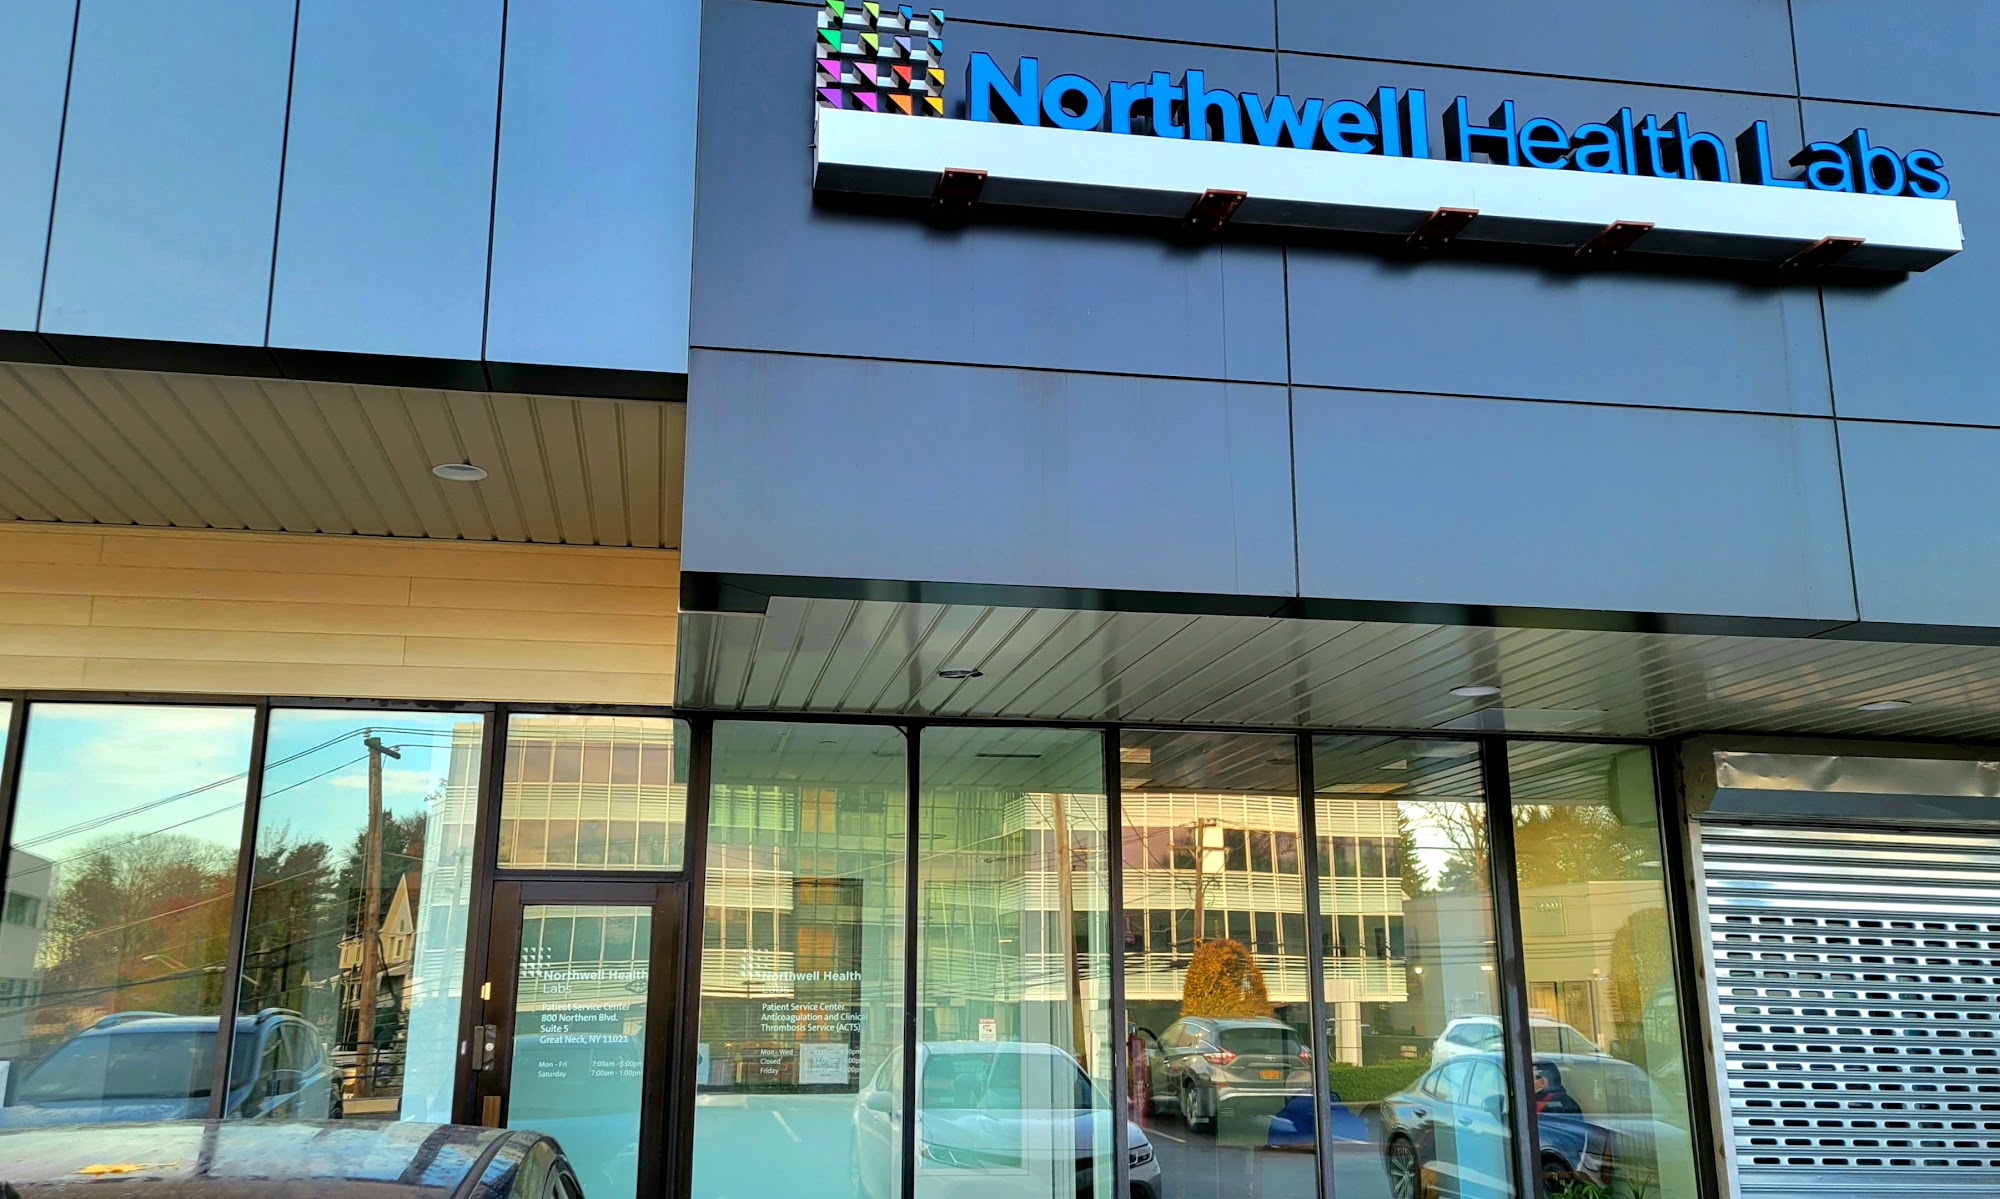 Northwell Health Systems